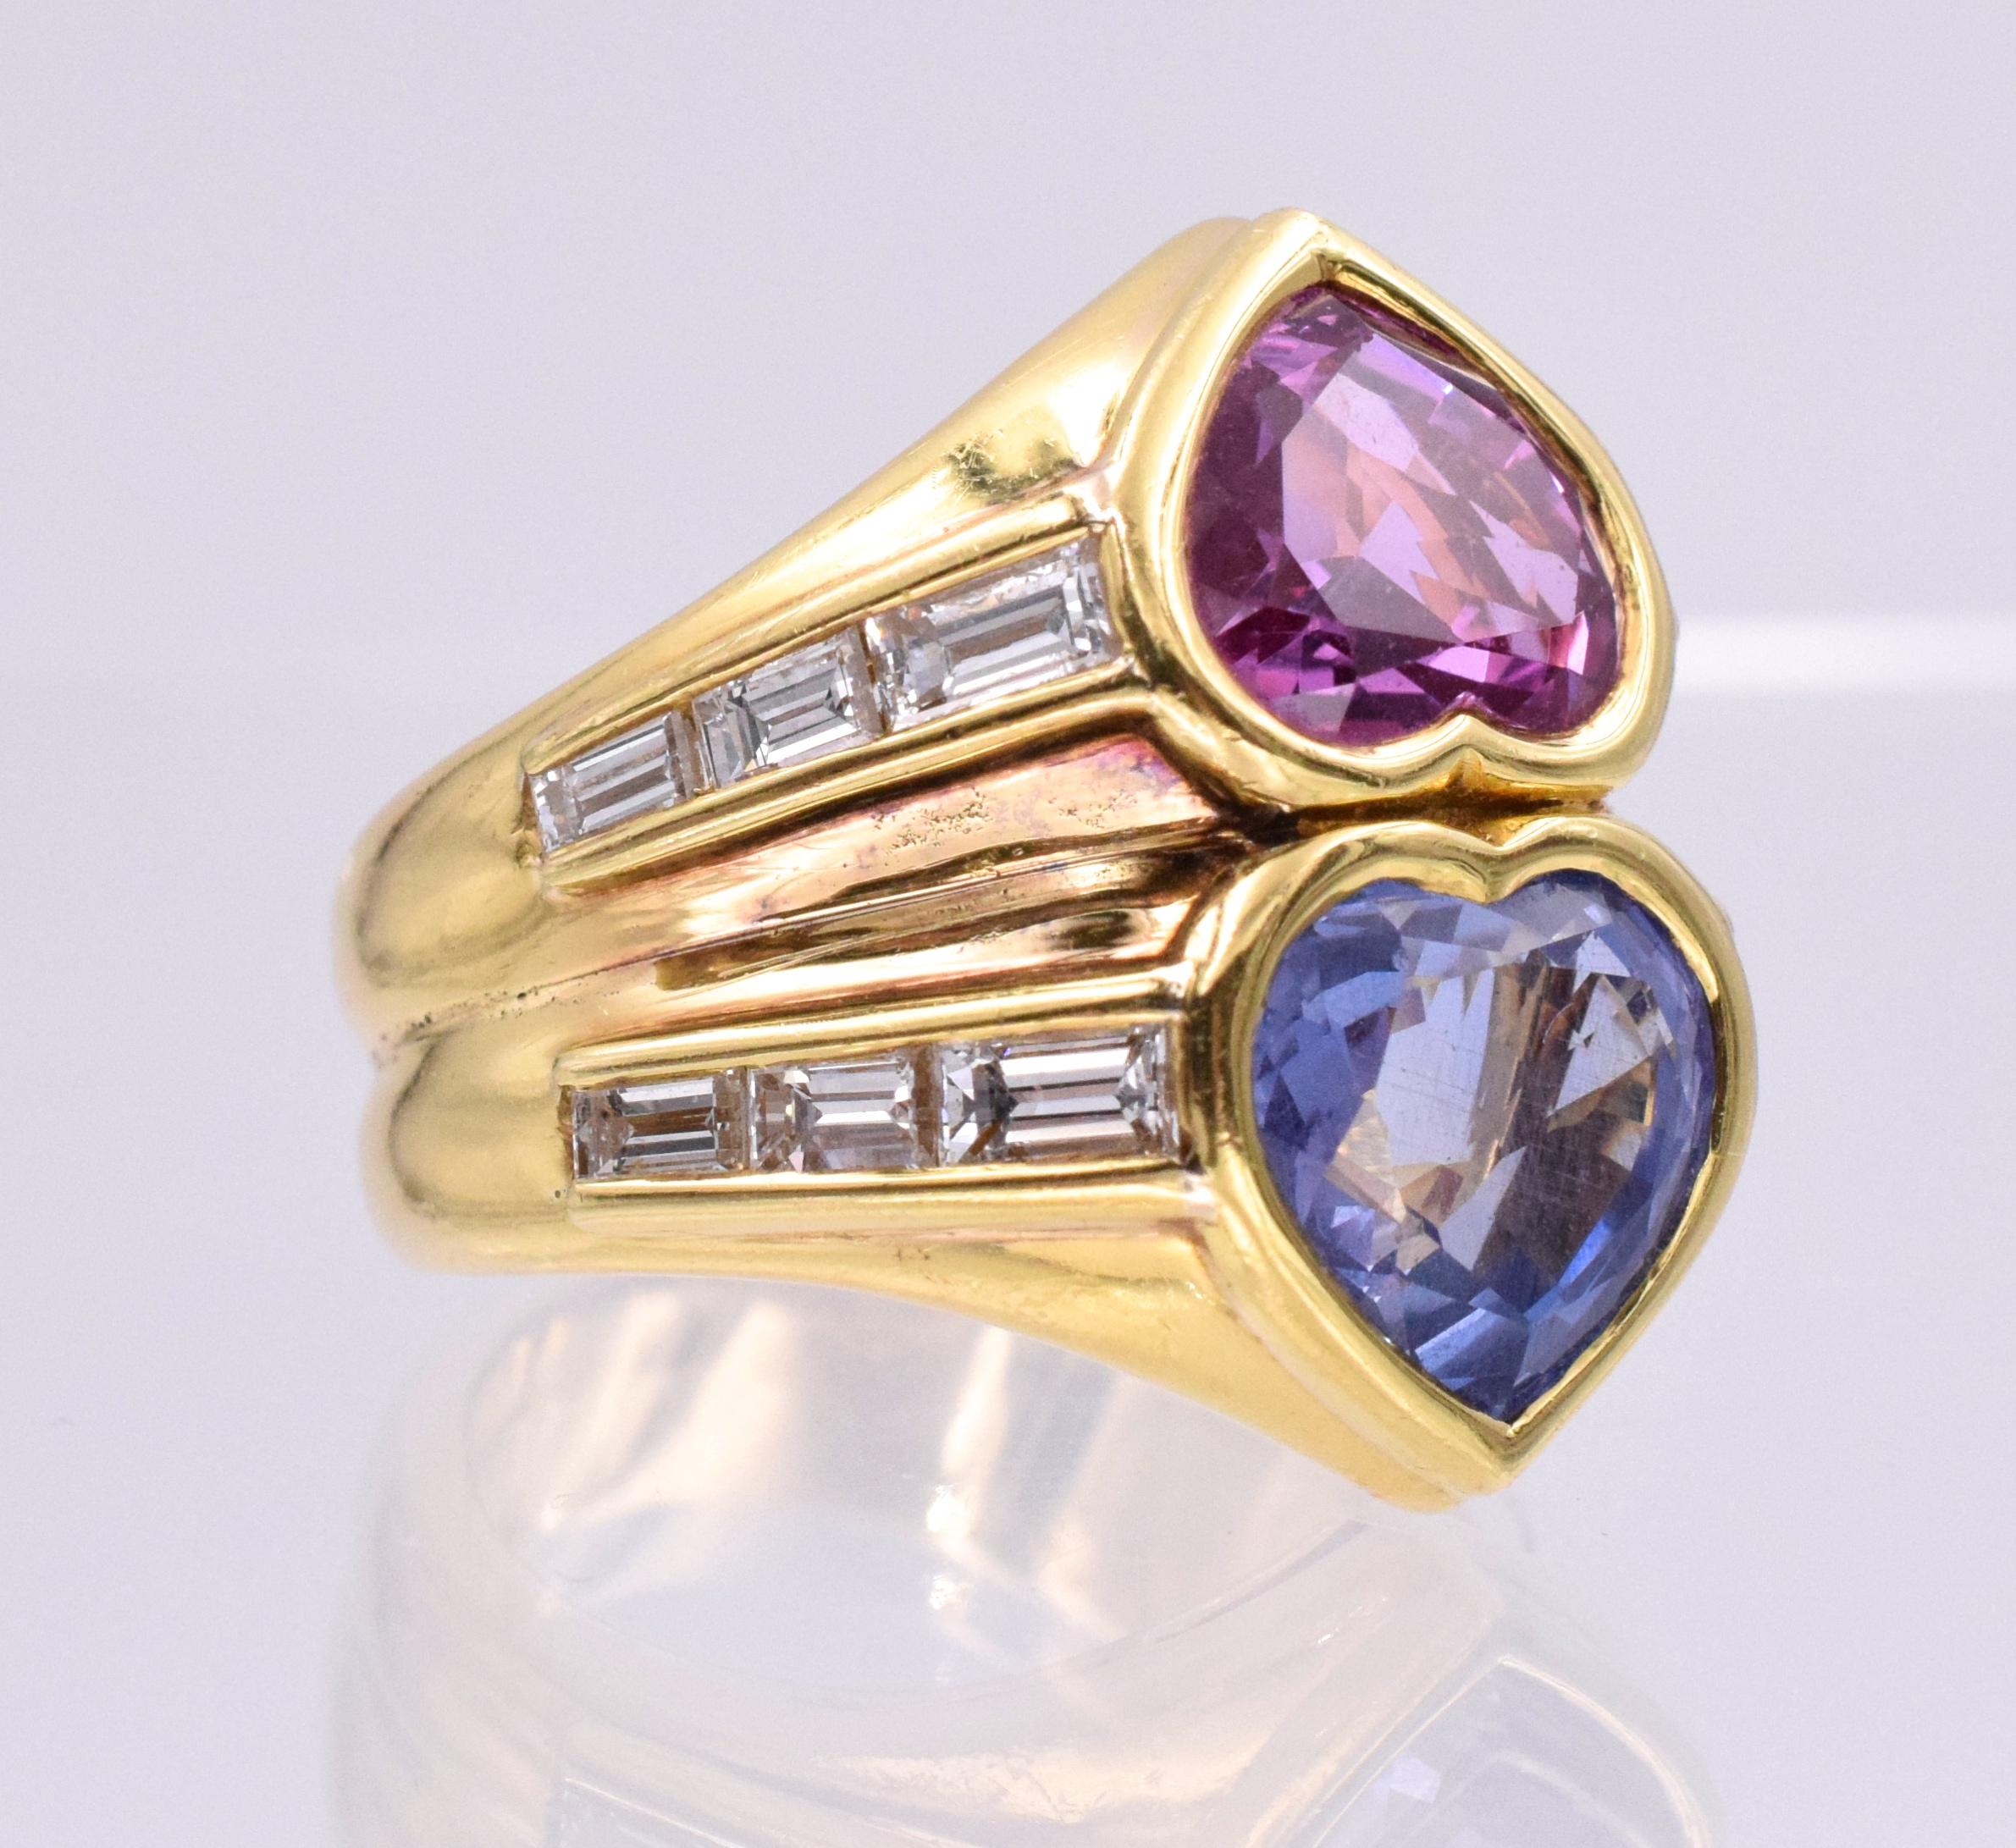 BULGARI Pink & Blue Sapphire & Diamond ring, collet-set with a heart shaped sapphire stated to weigh 4.00 carats and a similarly cut pink sapphire stated to weigh 3.62 carats, framed by baguette diamonds,  Signed BVLGARI, maker's mark for Bvlgari,